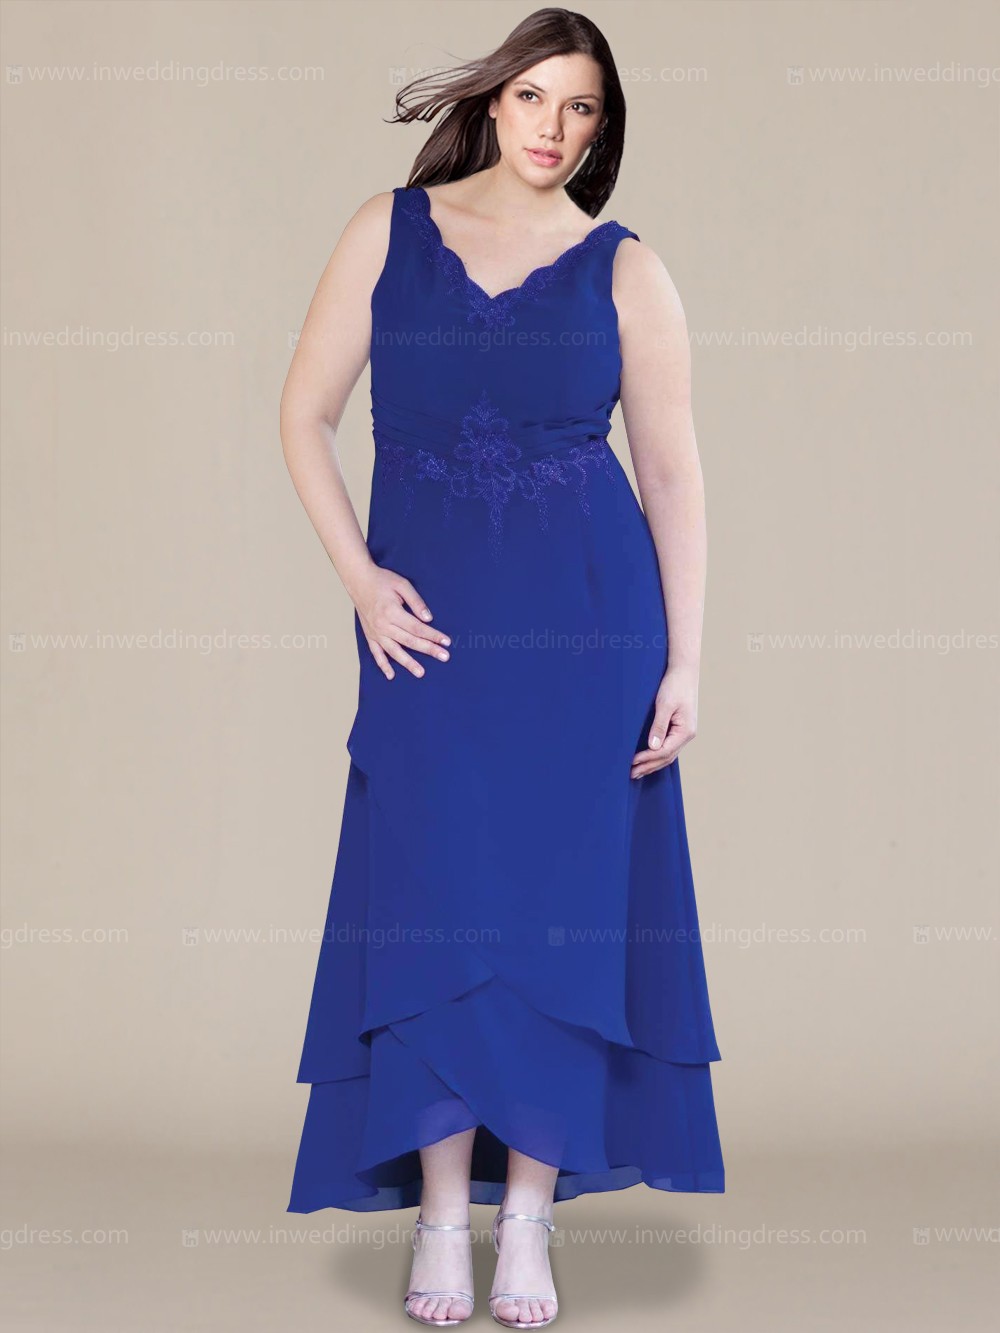 Plus size mother of the bride dress chiffon plus size mother of the bride dress mo218. chiffon mother of the  bride YXQJLQY